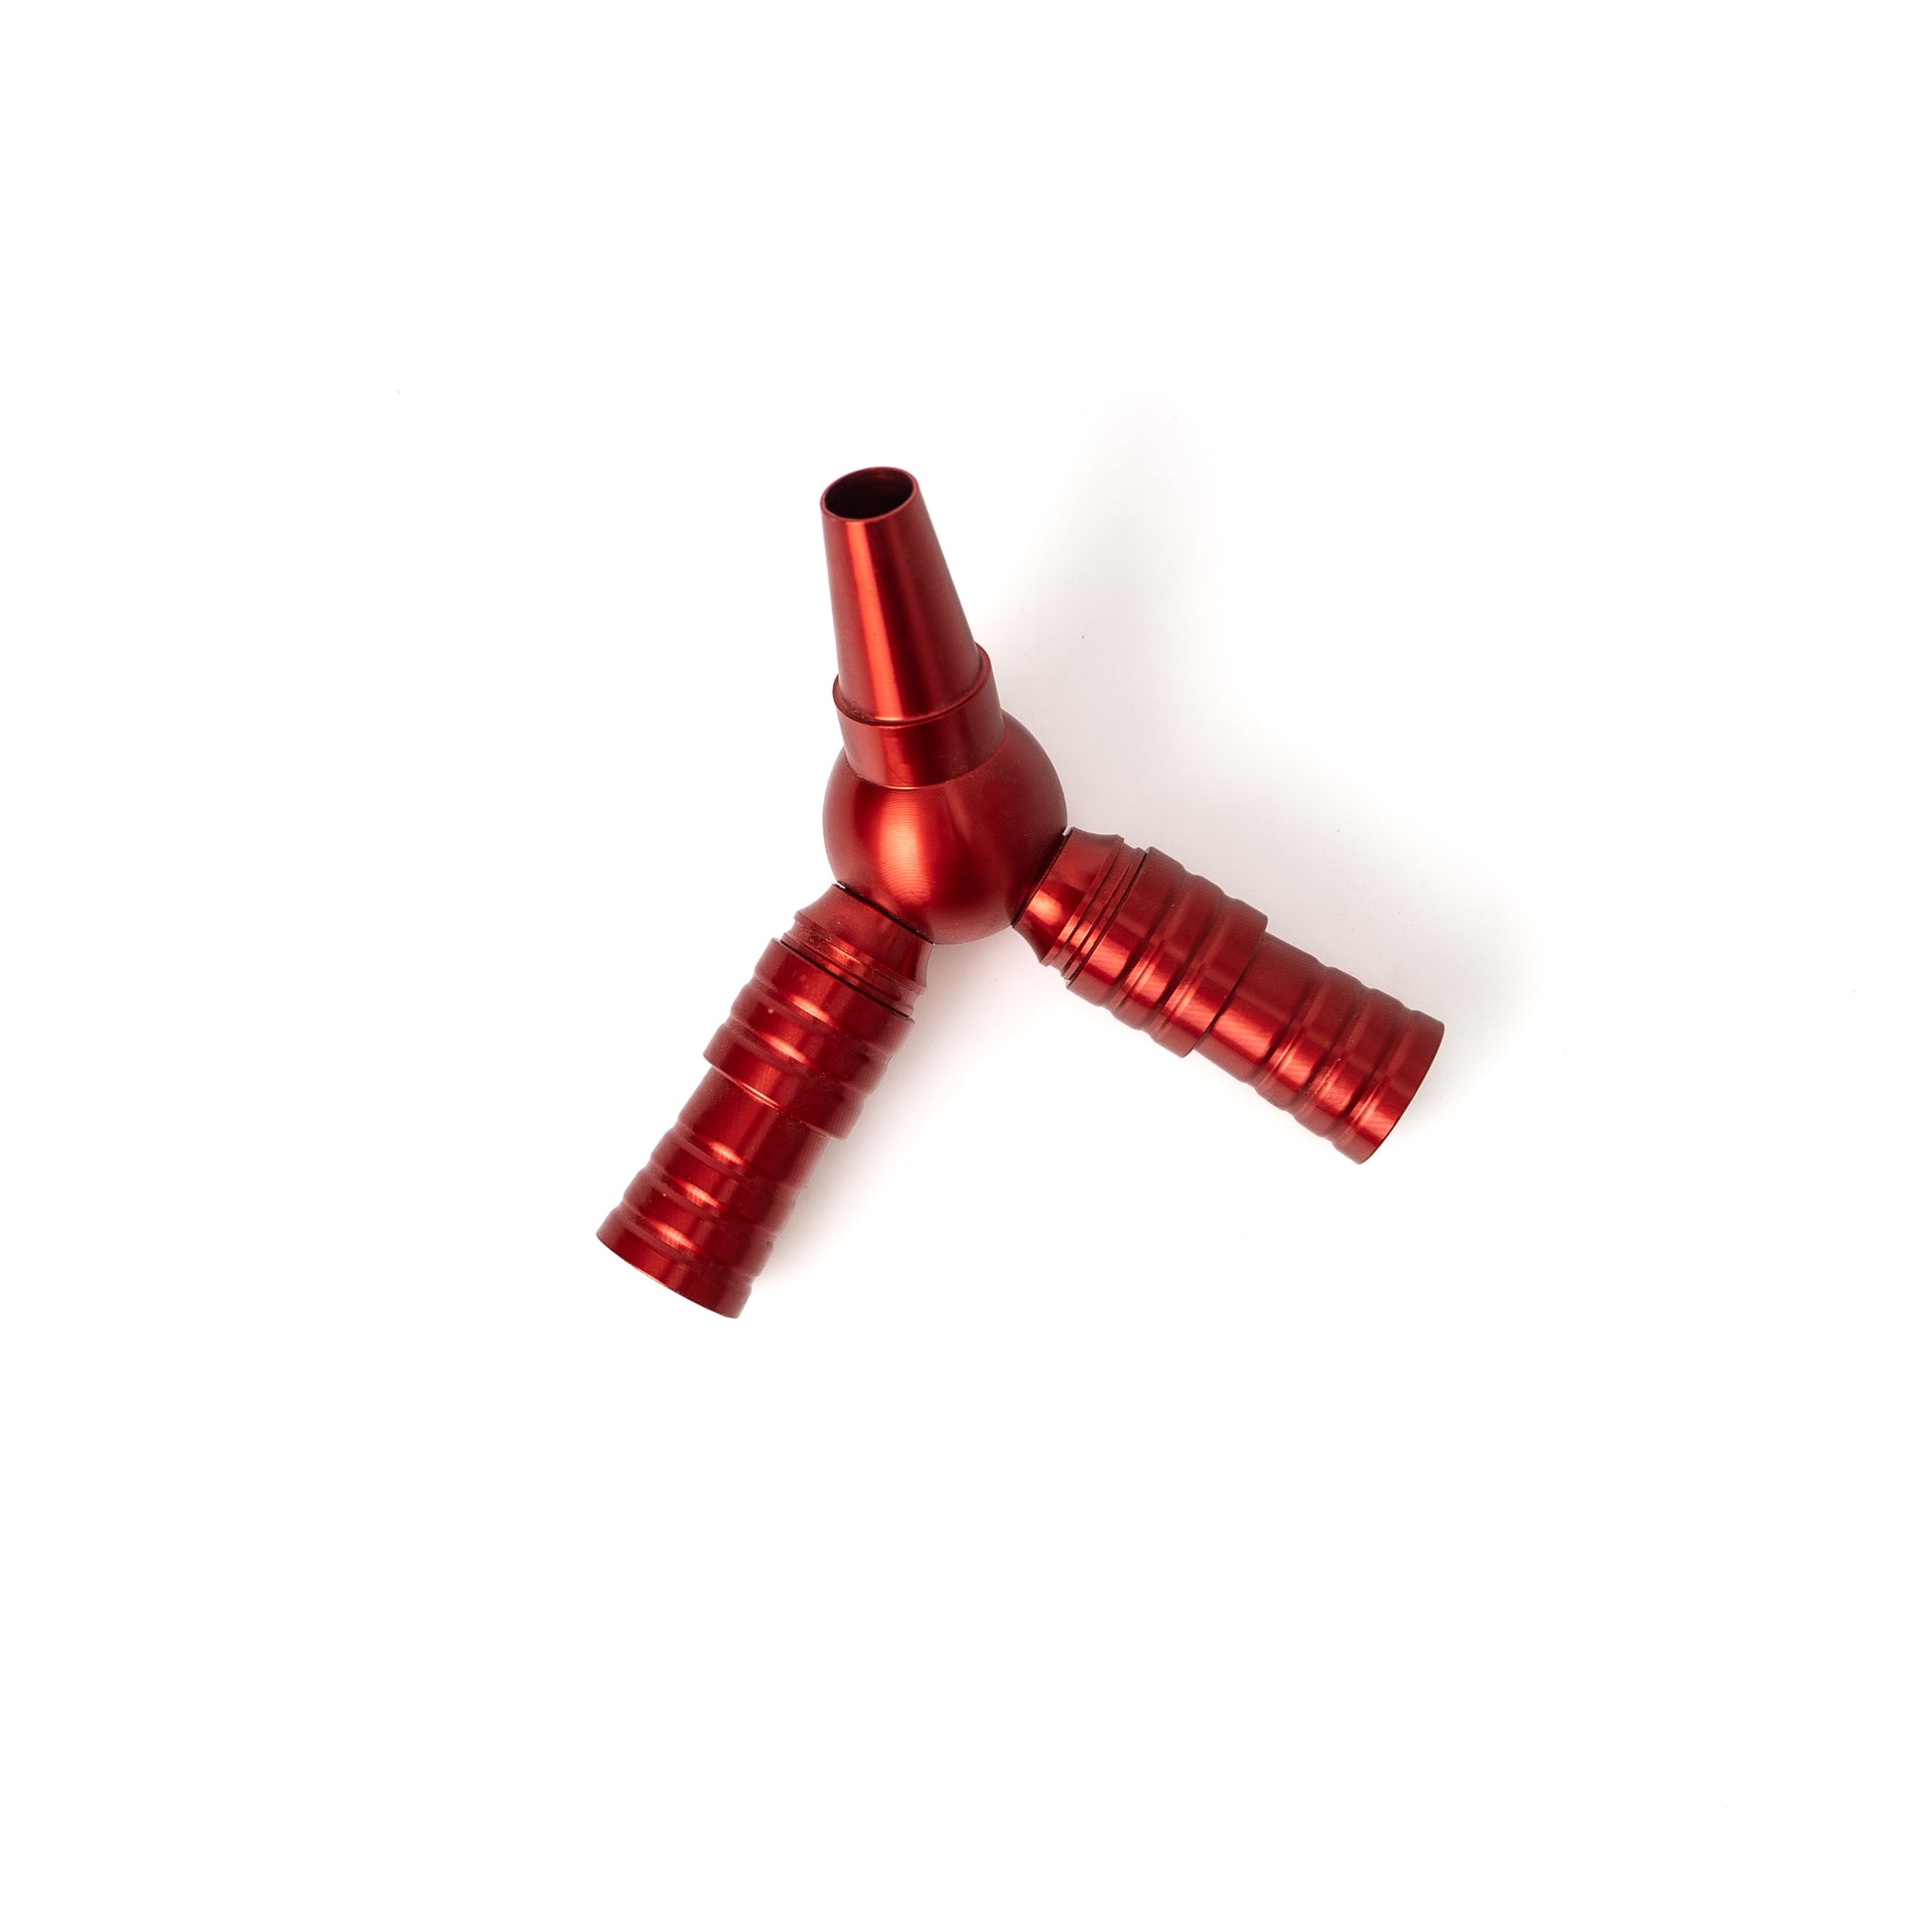 Dual Pipe Extension (Connector) for Hookah Pipe - Red